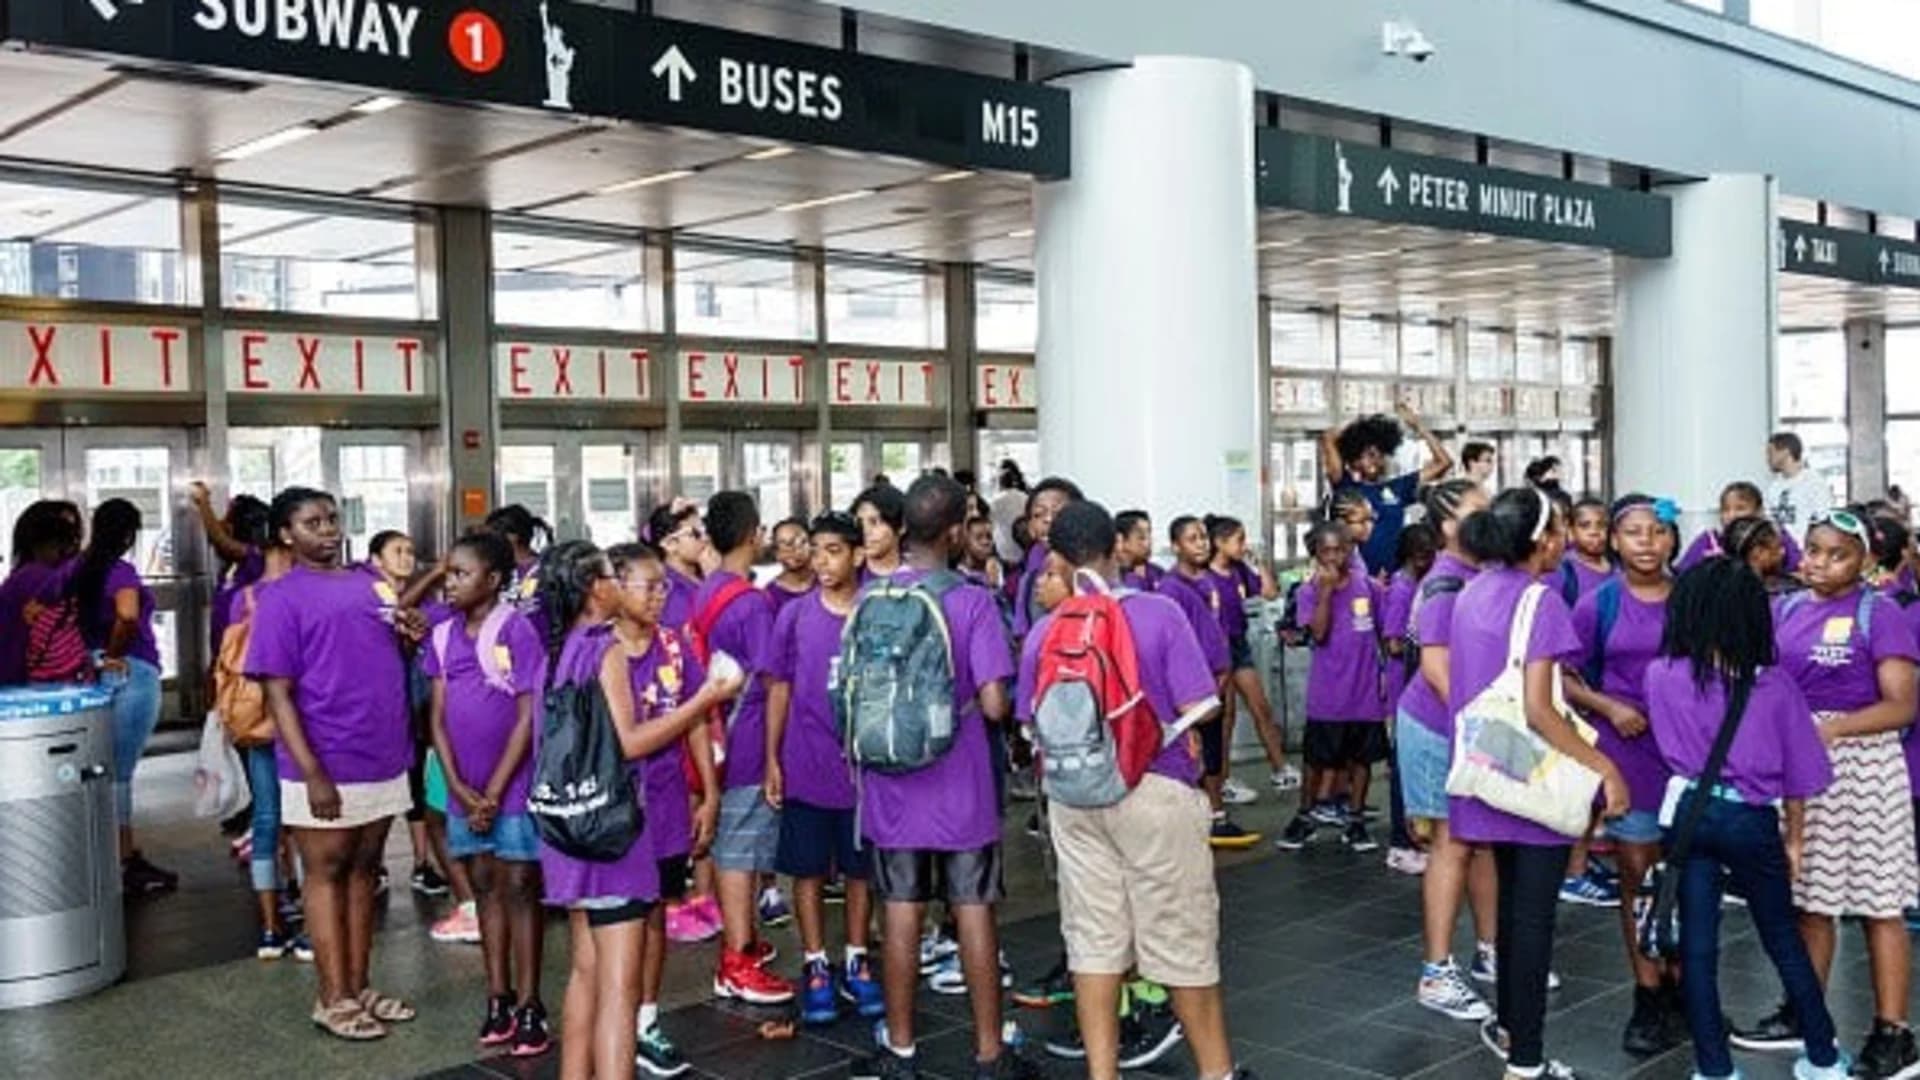 #N12BX: Students protest summer camp cuts